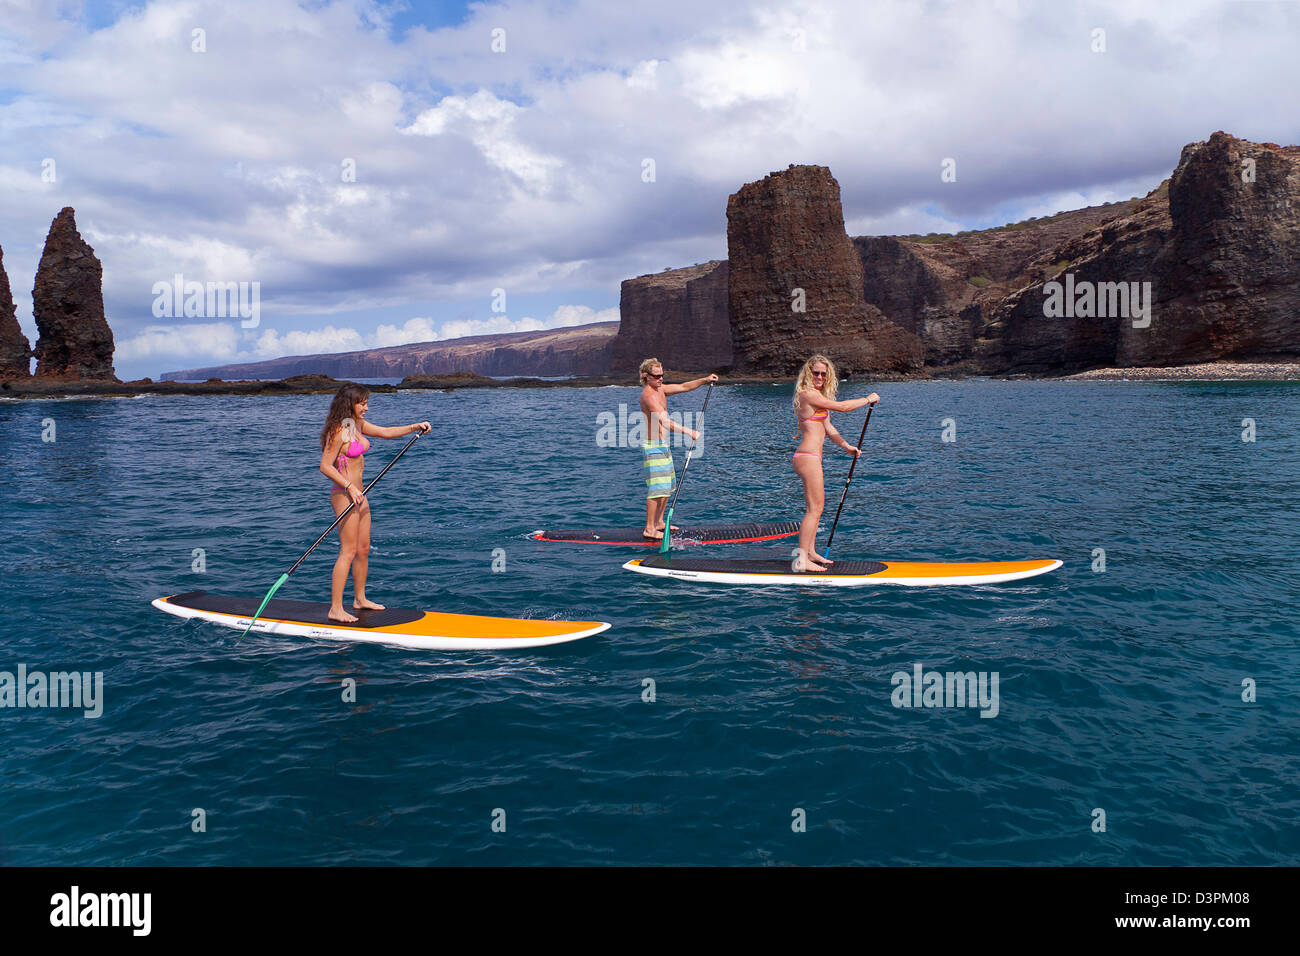 Three young people on stand-up paddle boards at Needles off the island of Lanai, Hawaii. All three are model released. Stock Photo